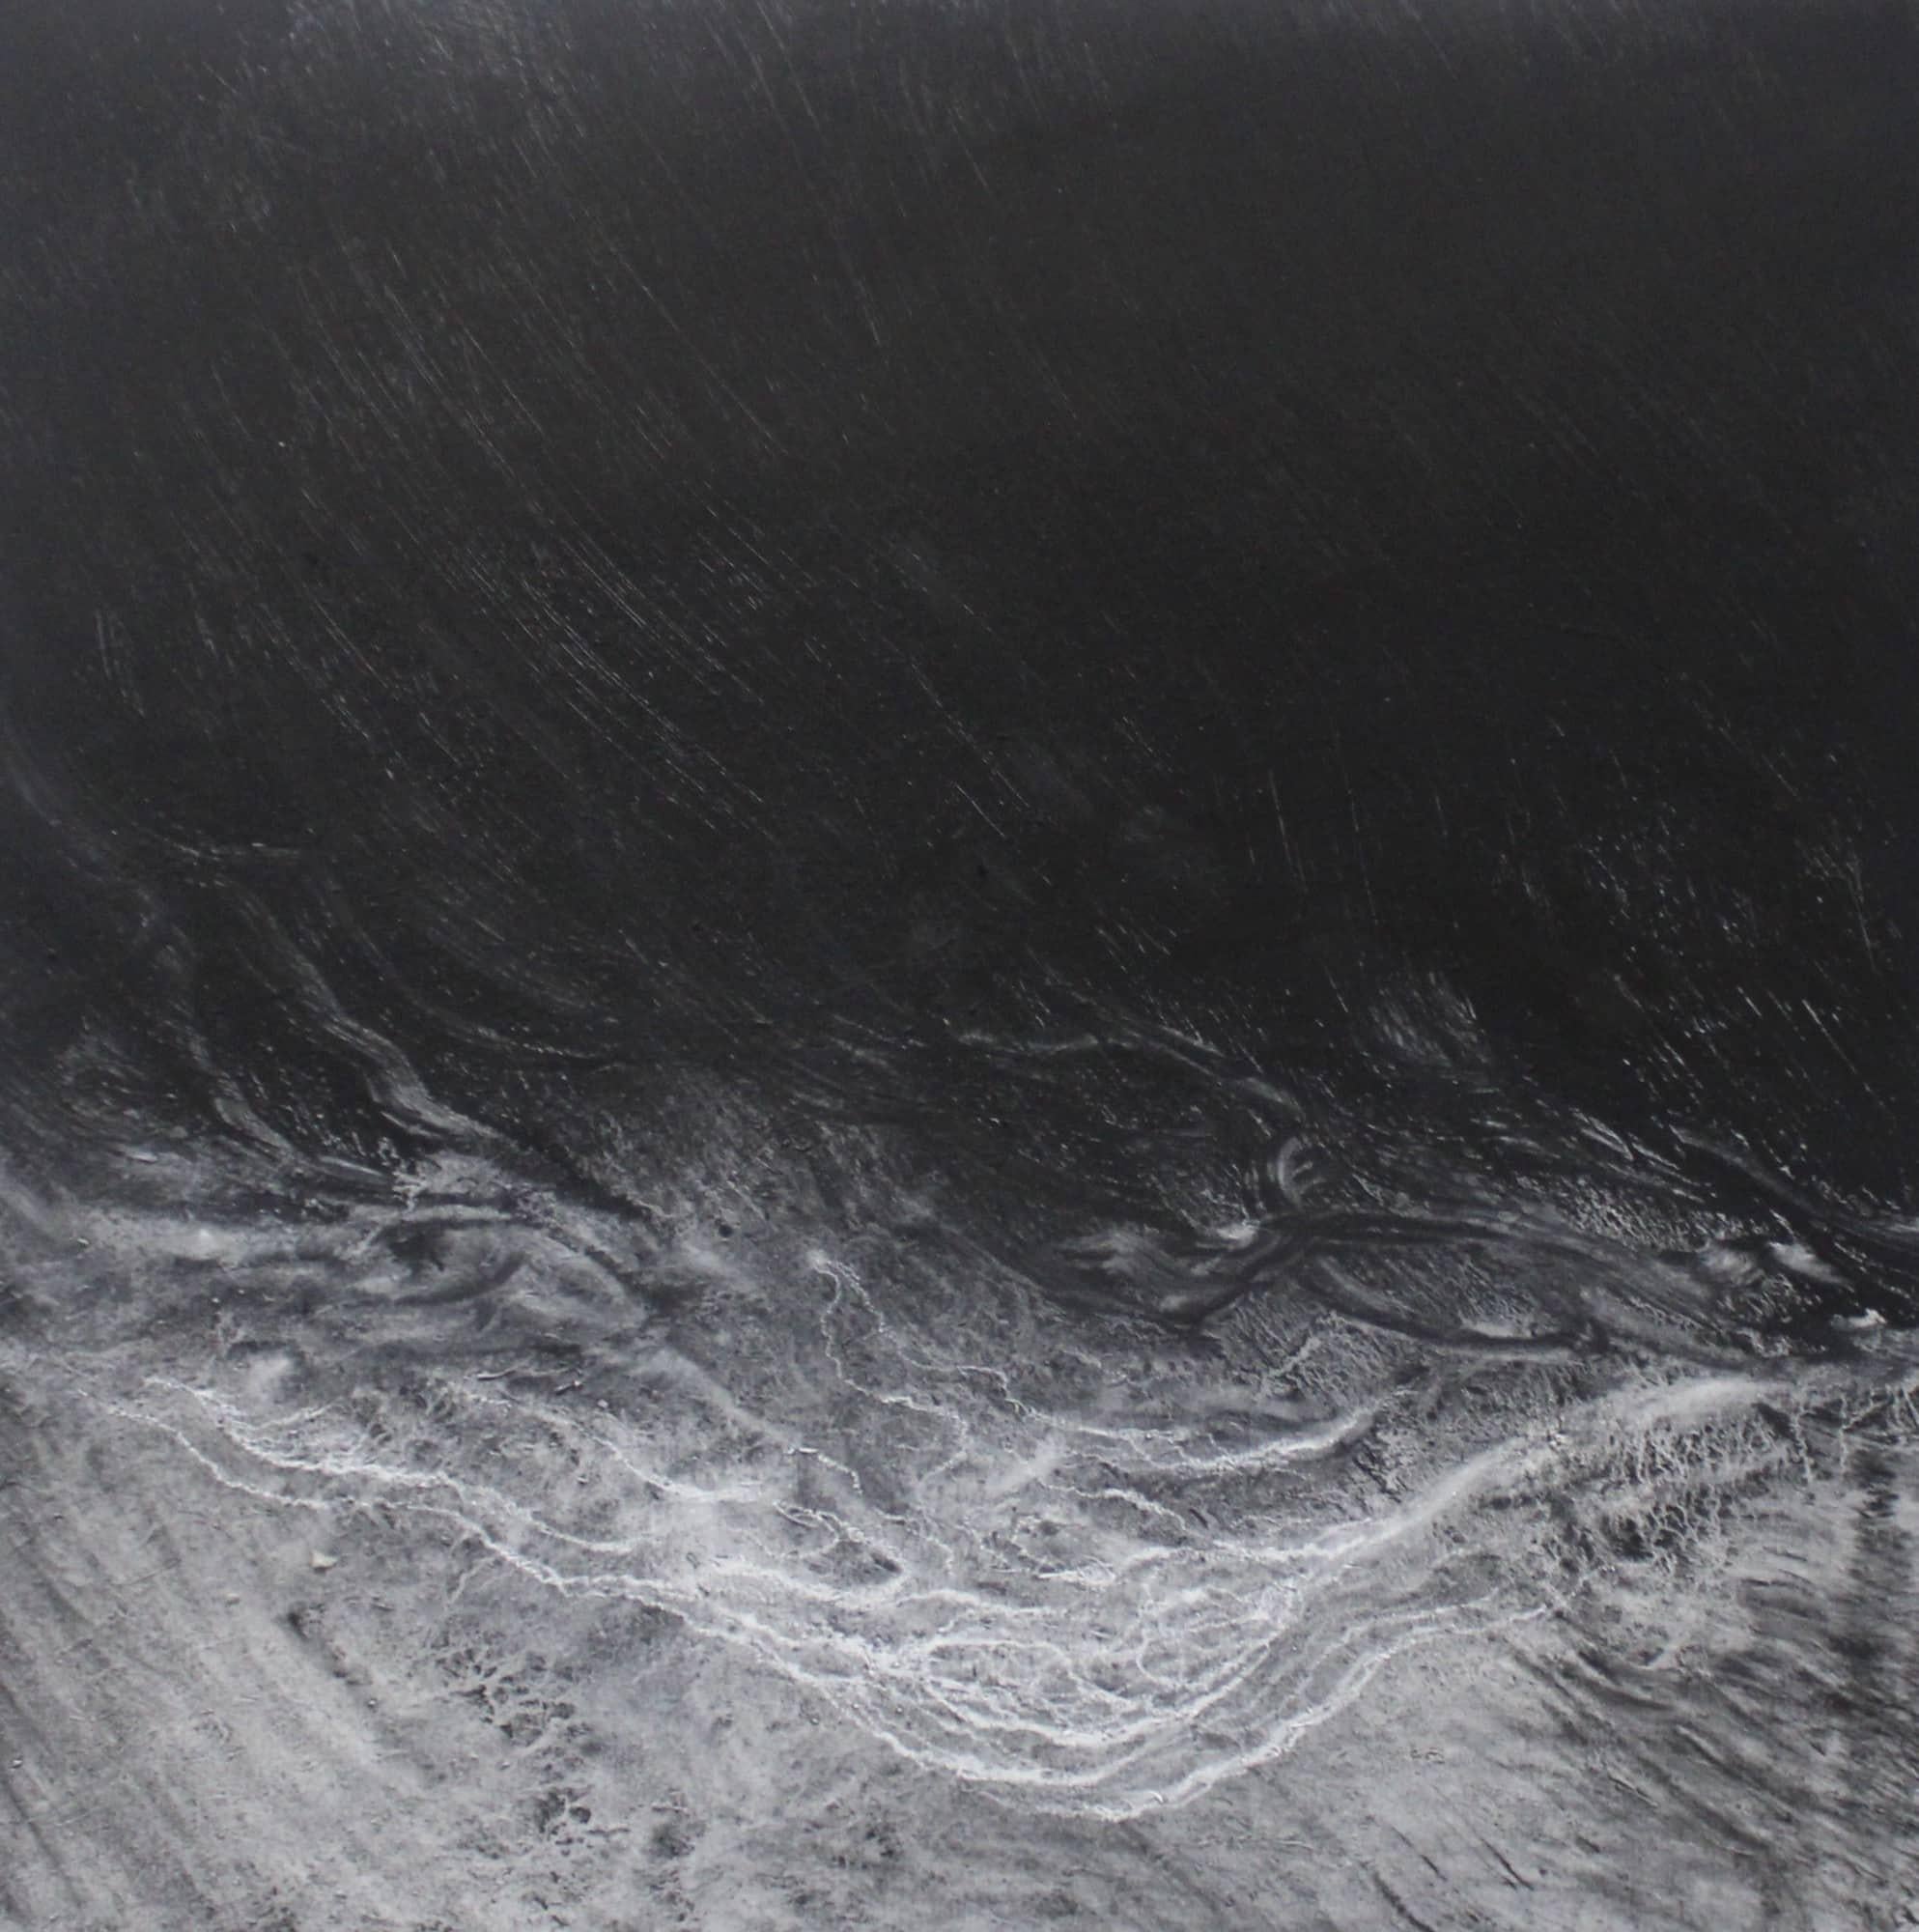 The void is a unique oil, pigments and acrylics on canvas painting by contemporary artist Franco Salas Borquez, dimensions are 100 × 100 cm (39.4 × 39.4 in). 
The artwork is signed, sold unframed and comes with a certificate of authenticity.

Franco